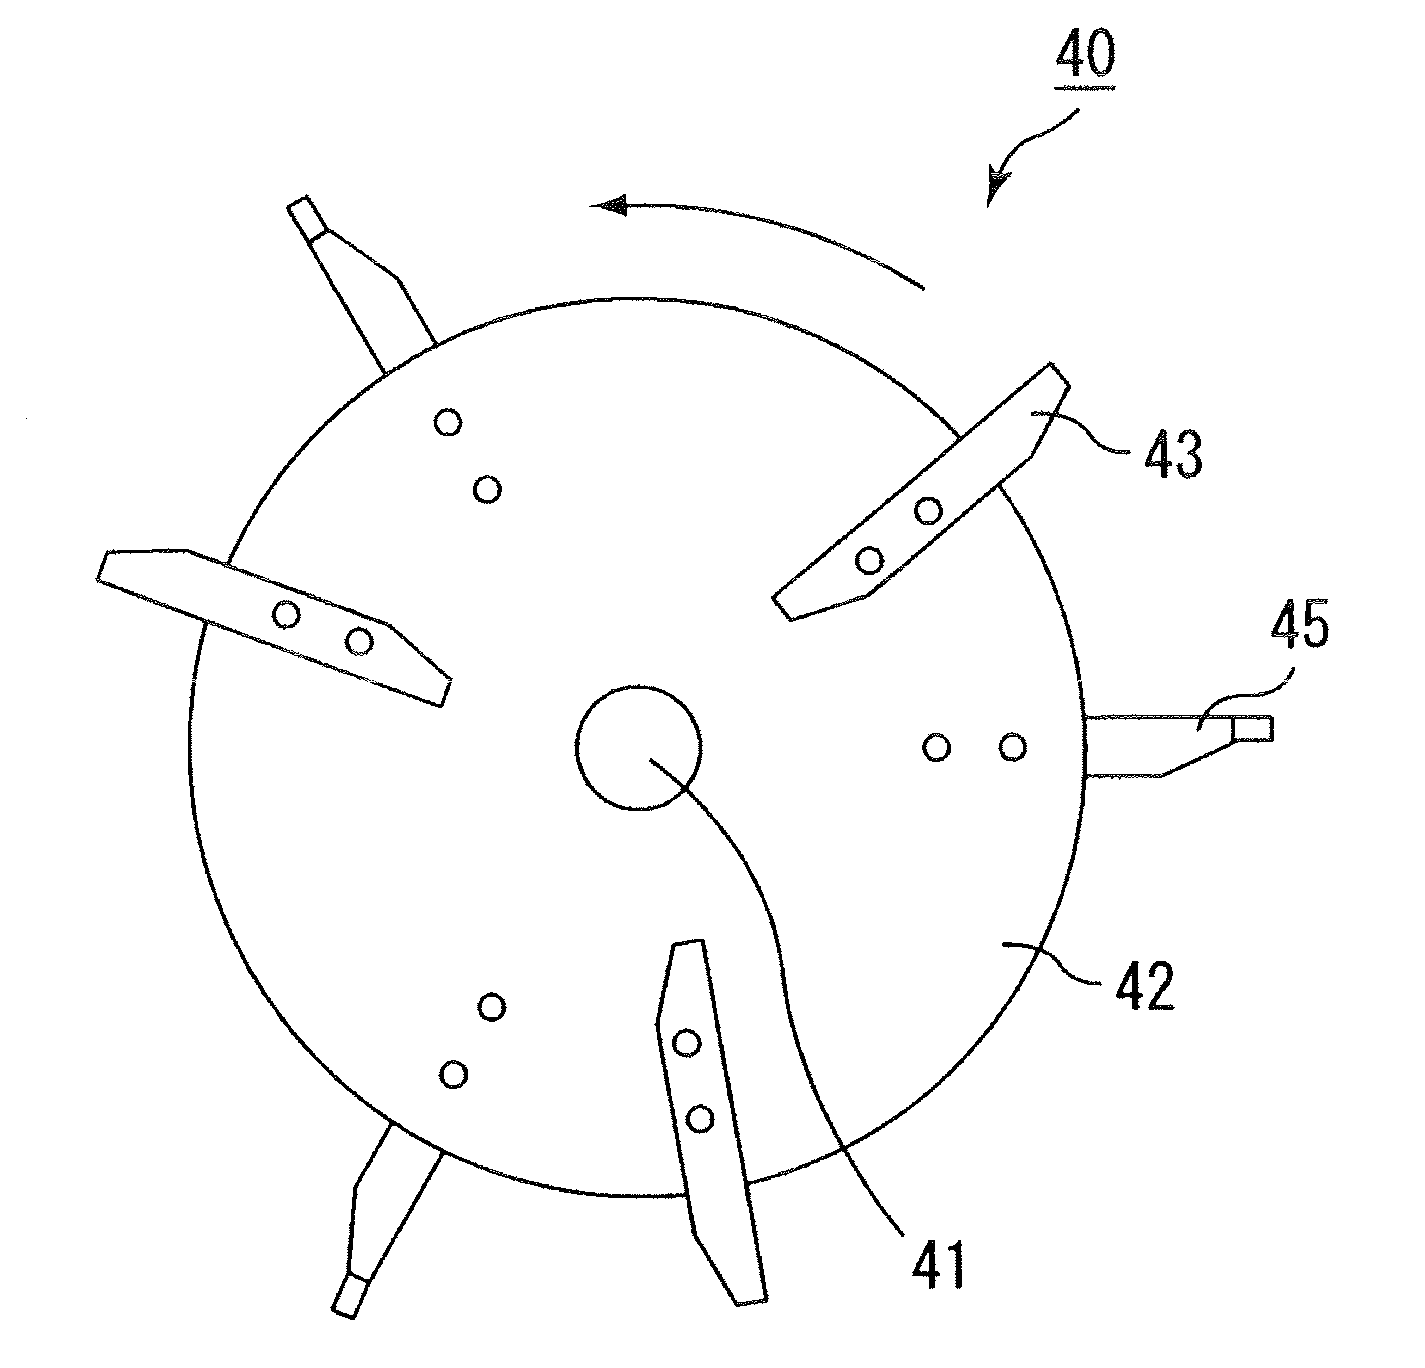 Wet mixing apparatus, wet mixing method and method for manufacturing honeycomb structure